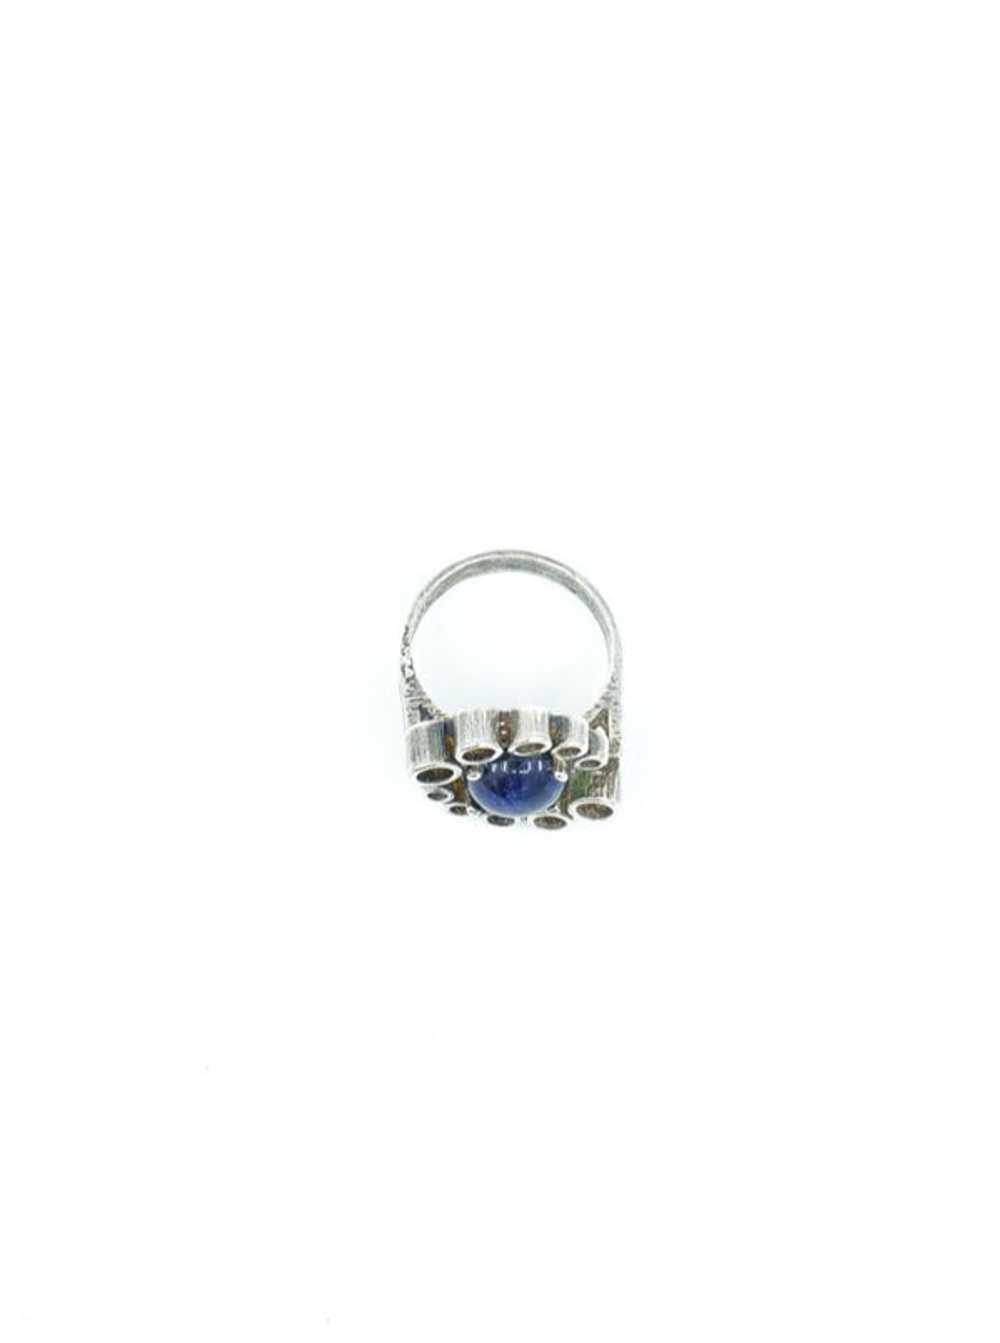 Sterling Silver Lapis Stone Ring - image 3